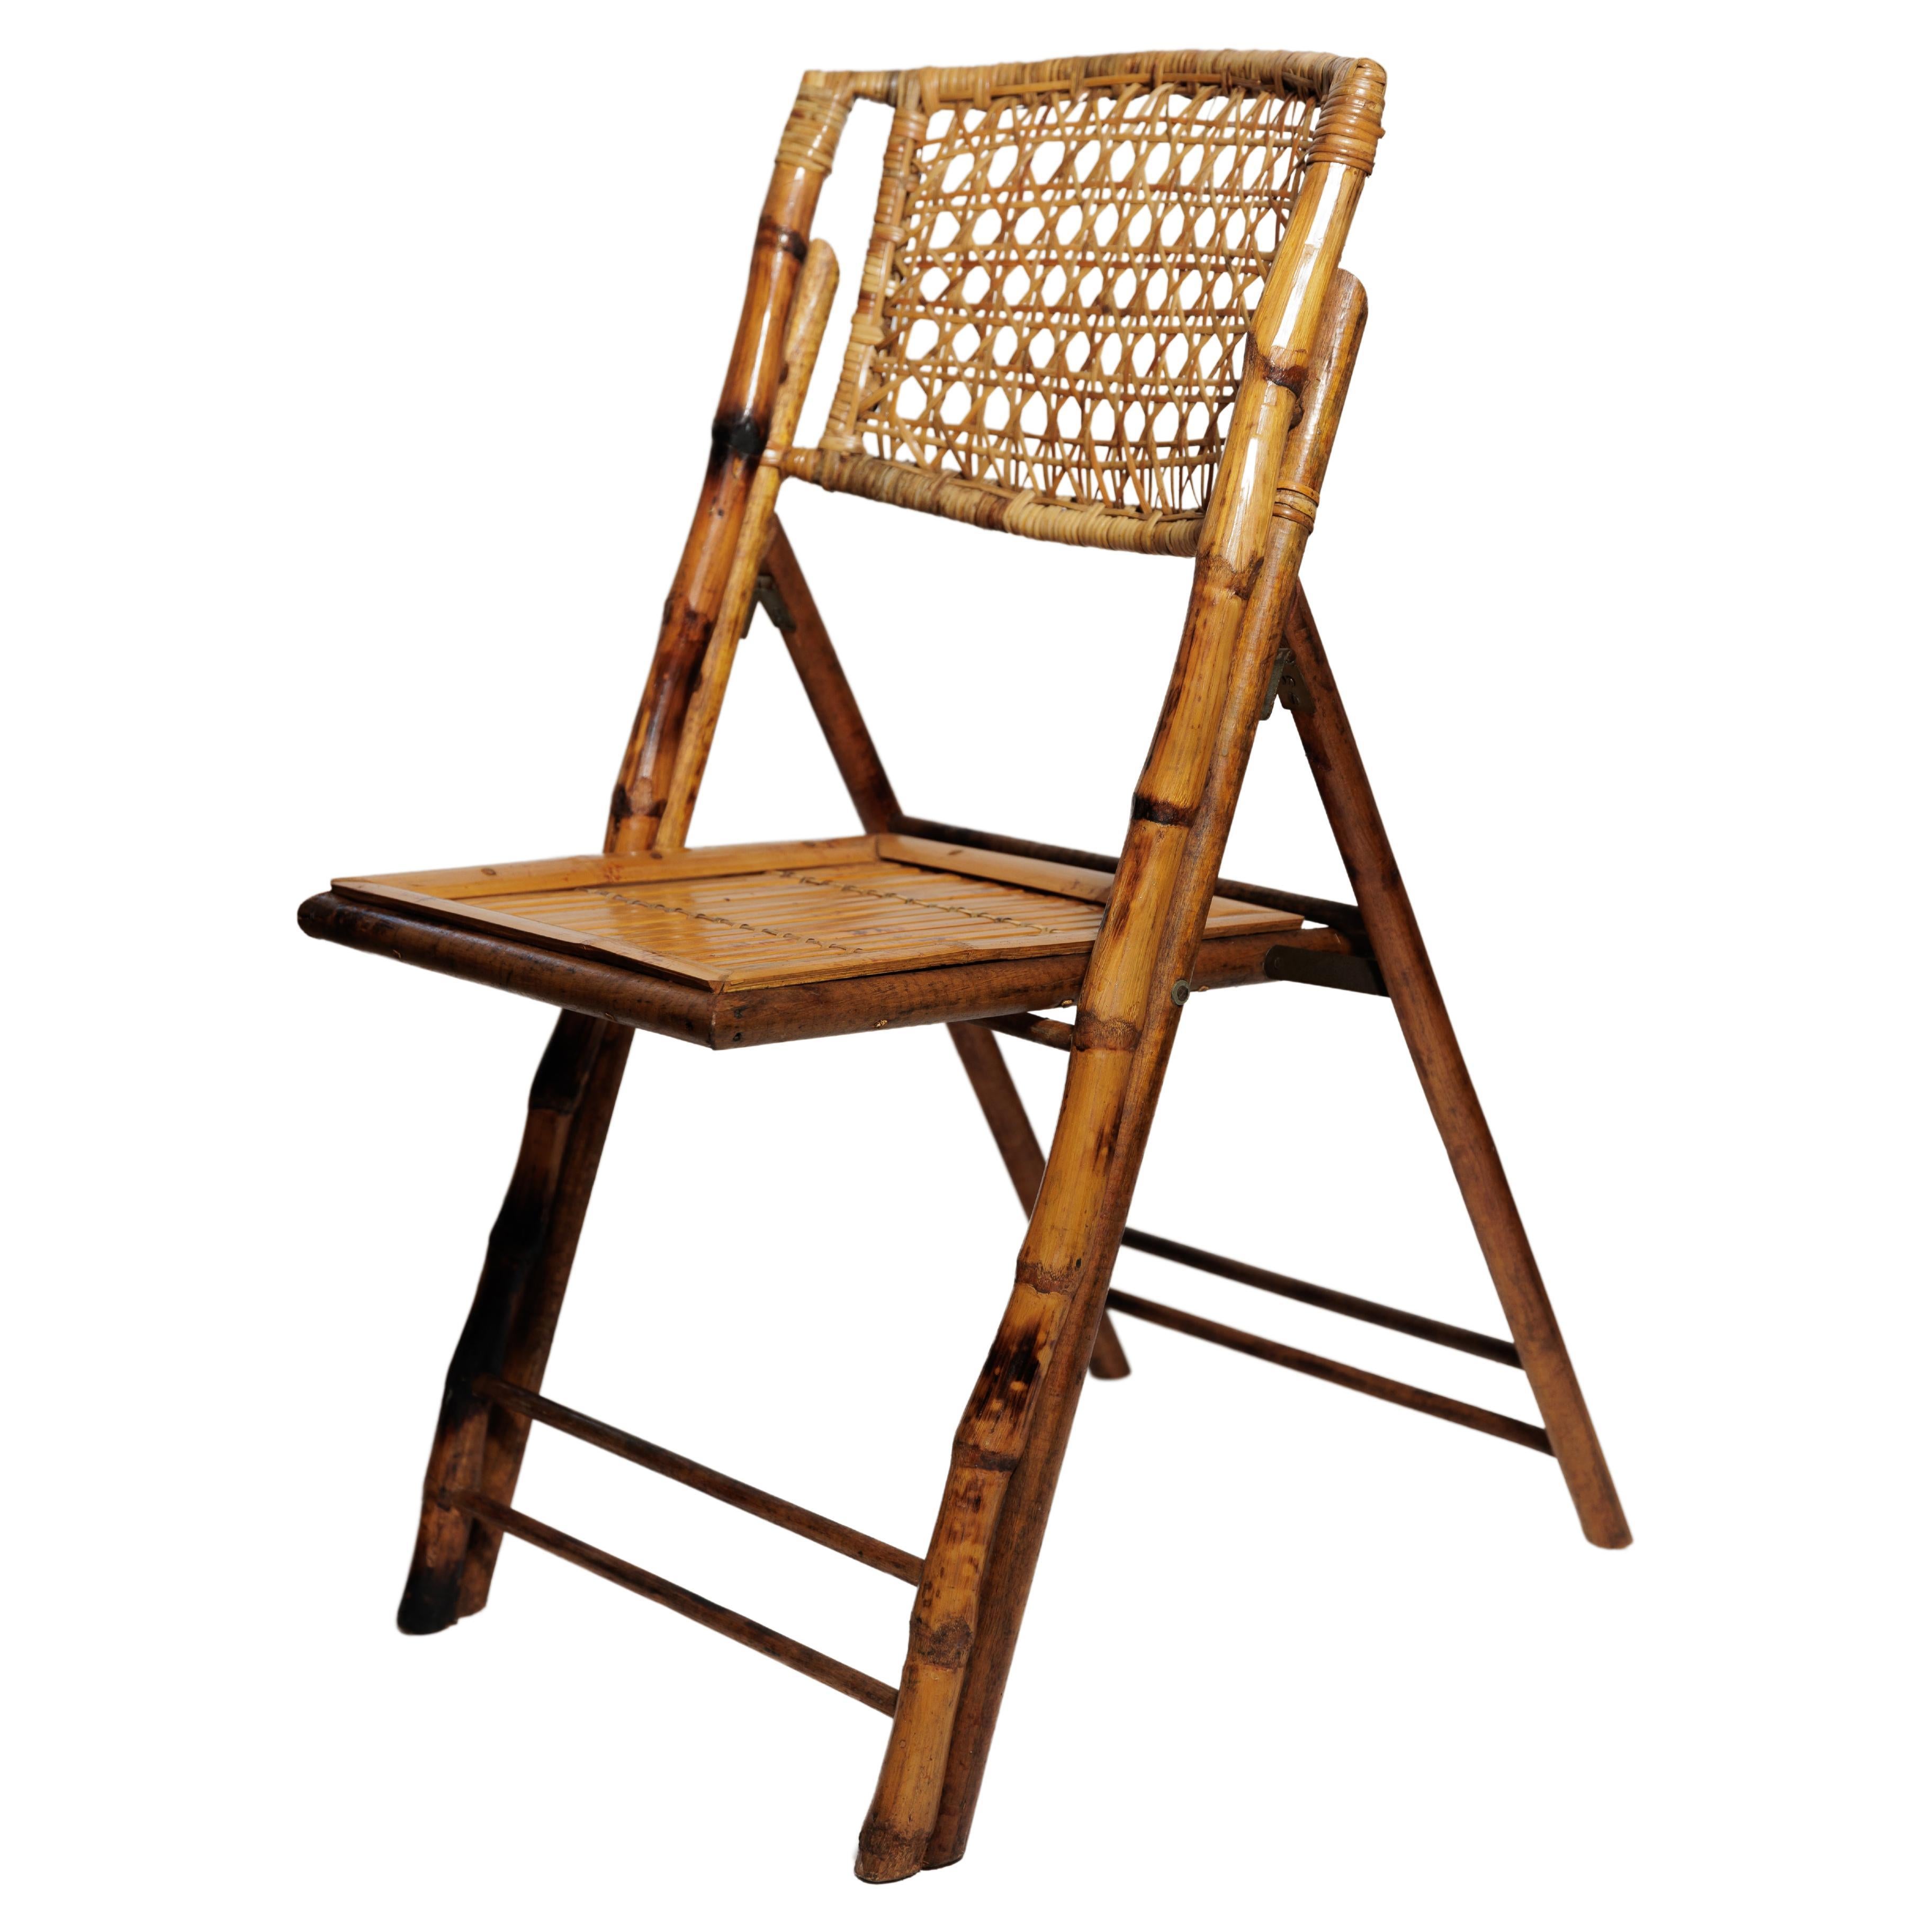 Set of Six Bamboo and Wicker Folding Chairs